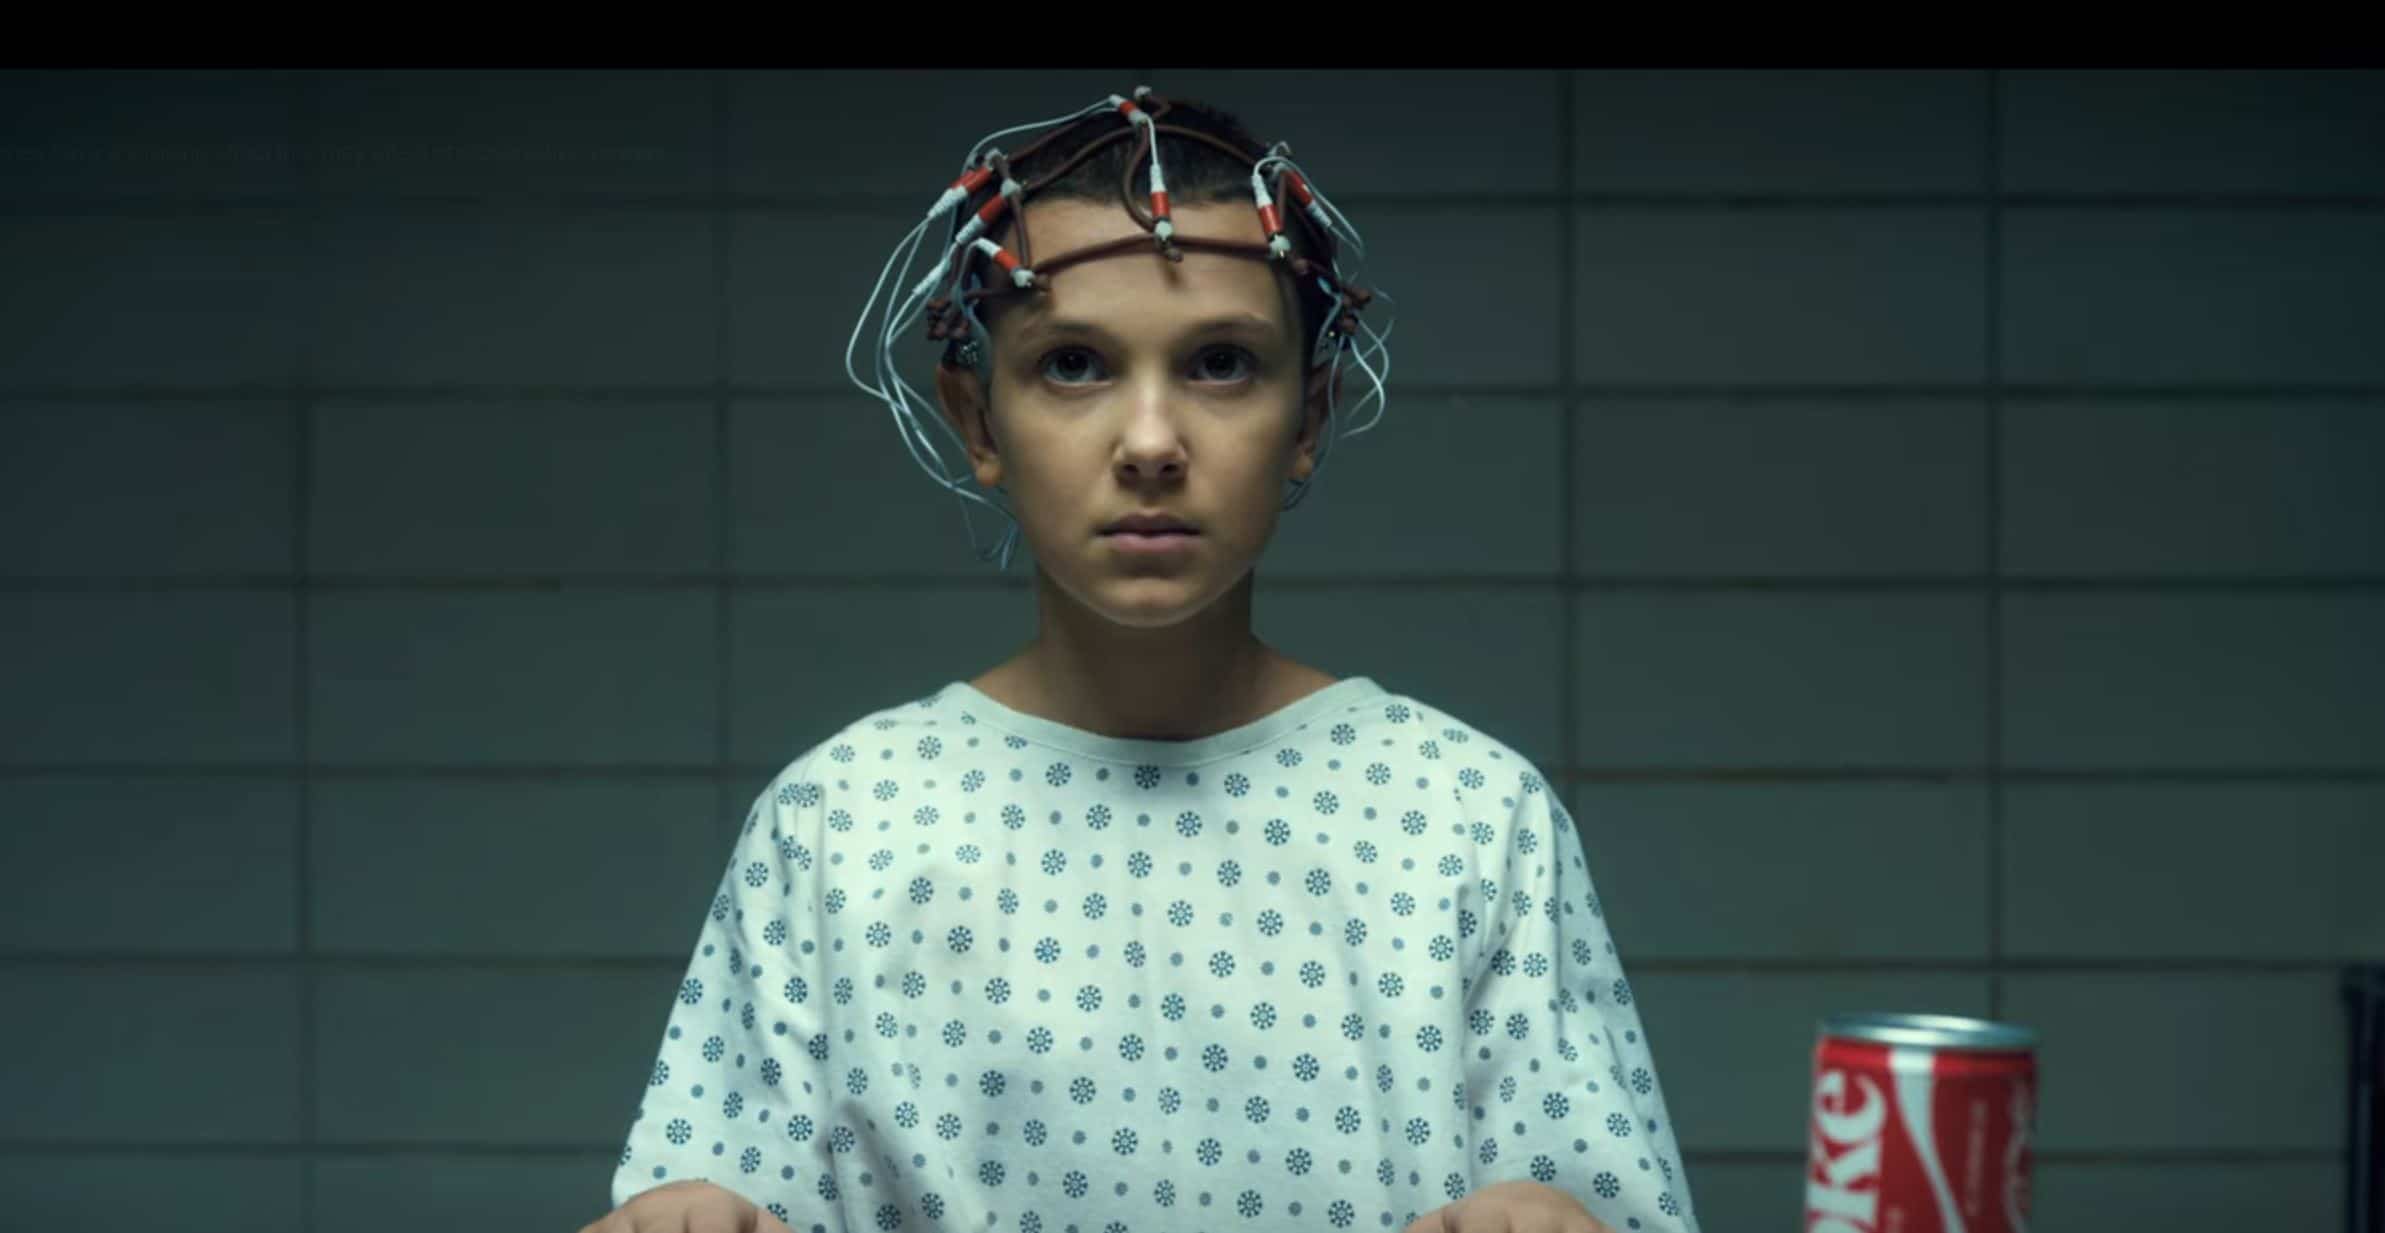 Eleven from Stranger Things gets an EEG